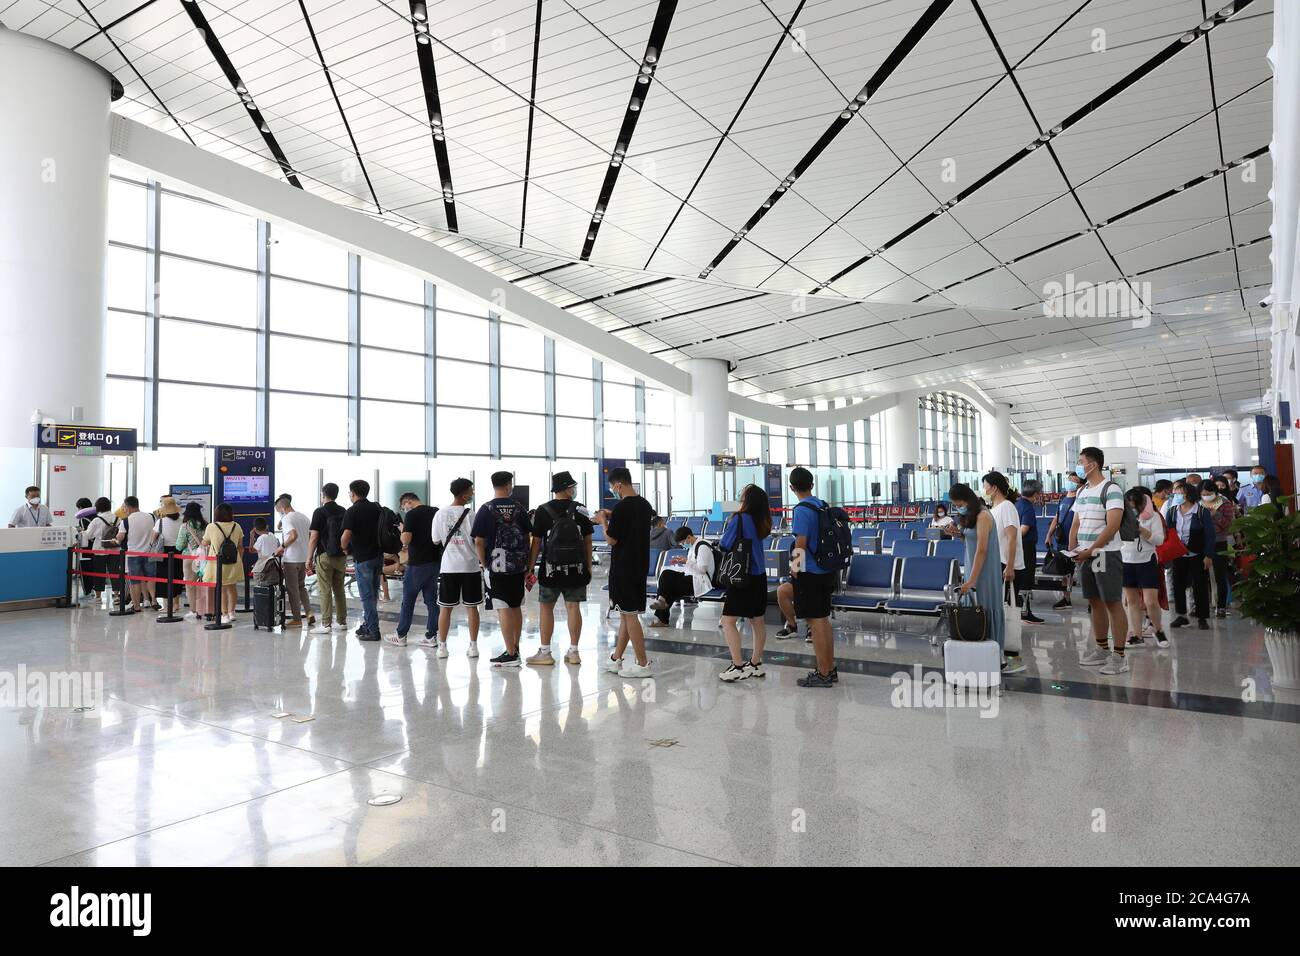 Zhangjiakou, China's Hebei Province. 4th Aug, 2020. Passengers wait for boarding at Terminal 2 of the extended Zhangjiakou Ningyuan Airport in Zhangjiakou, north China's Hebei Province, Aug. 4, 2020. The extended Zhangjiakou Ningyuan Airport, one of the key supporting infrastructure developments for the 2022 Beijing Winter Olympics, was completed and put into service on Monday. The expansion project includes a new terminal, an emergency rescue center, an apron, and an extended runway, among others. Credit: Wu Diansen/Xinhua/Alamy Live News Stock Photo